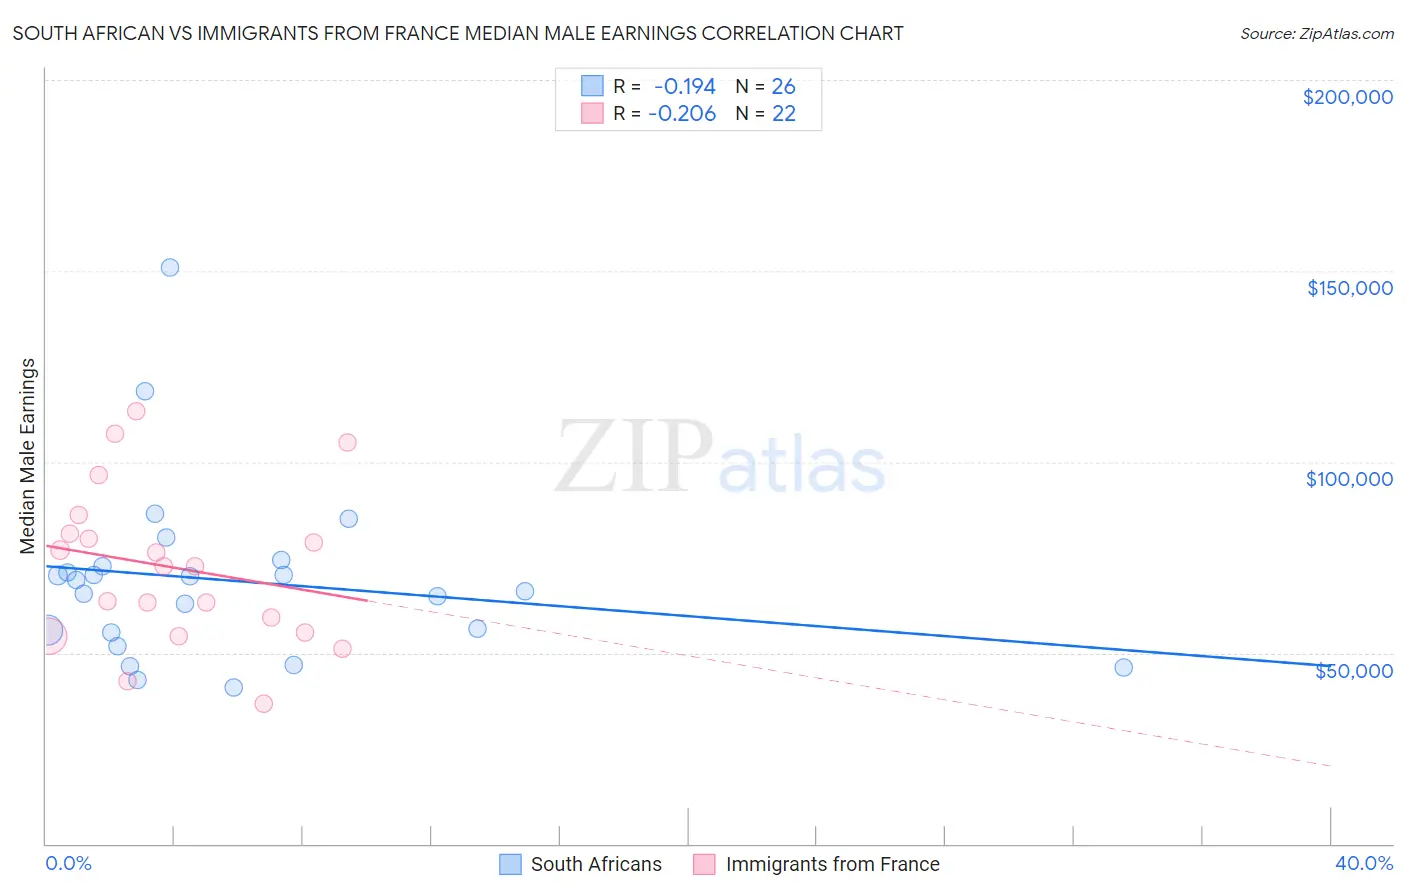 South African vs Immigrants from France Median Male Earnings